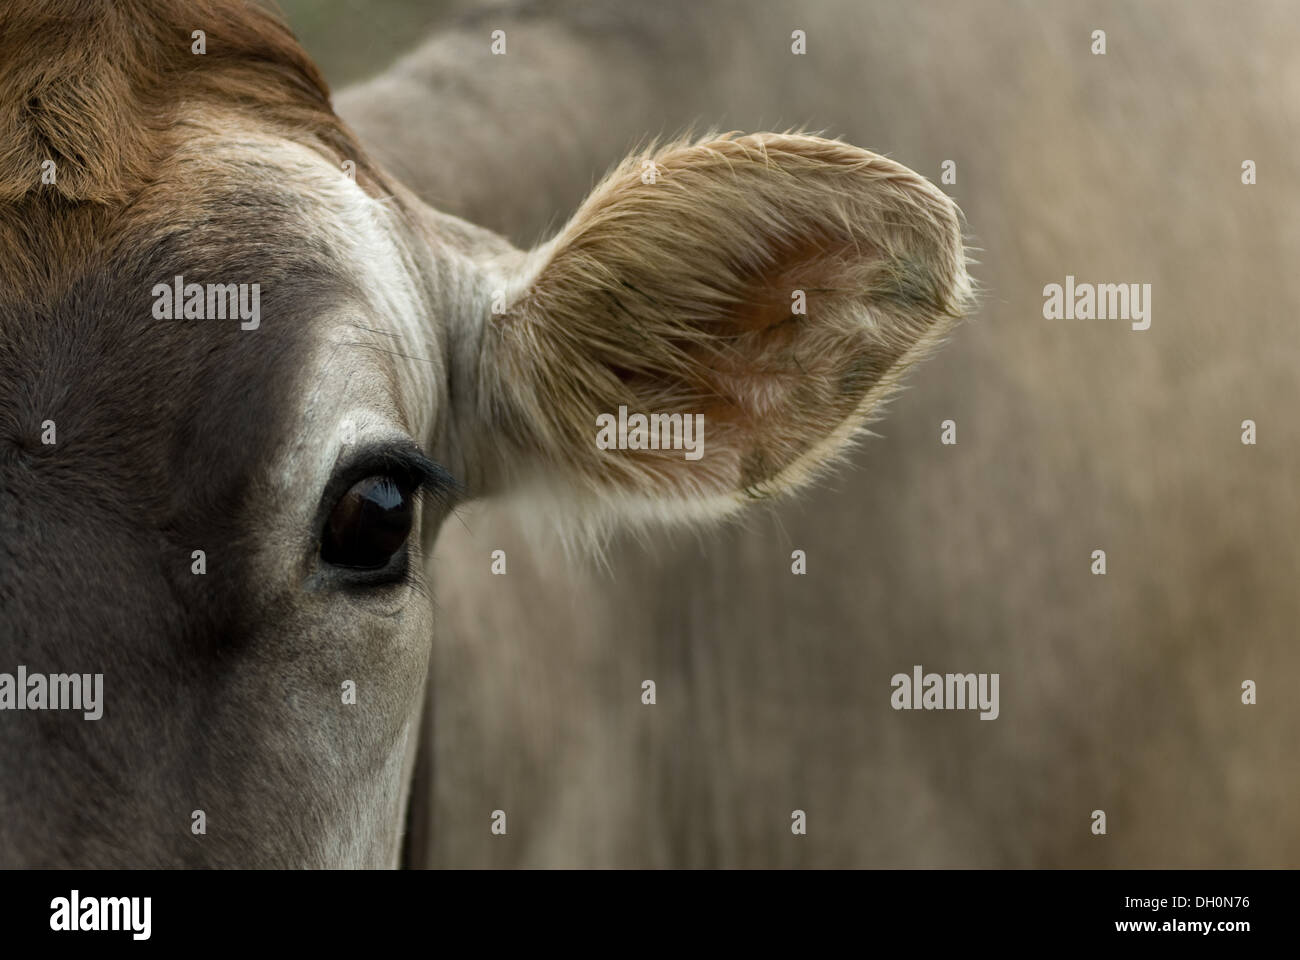 A Jersey cow stares laconically into the camera, one eye and ear showing prominently. Stock Photo